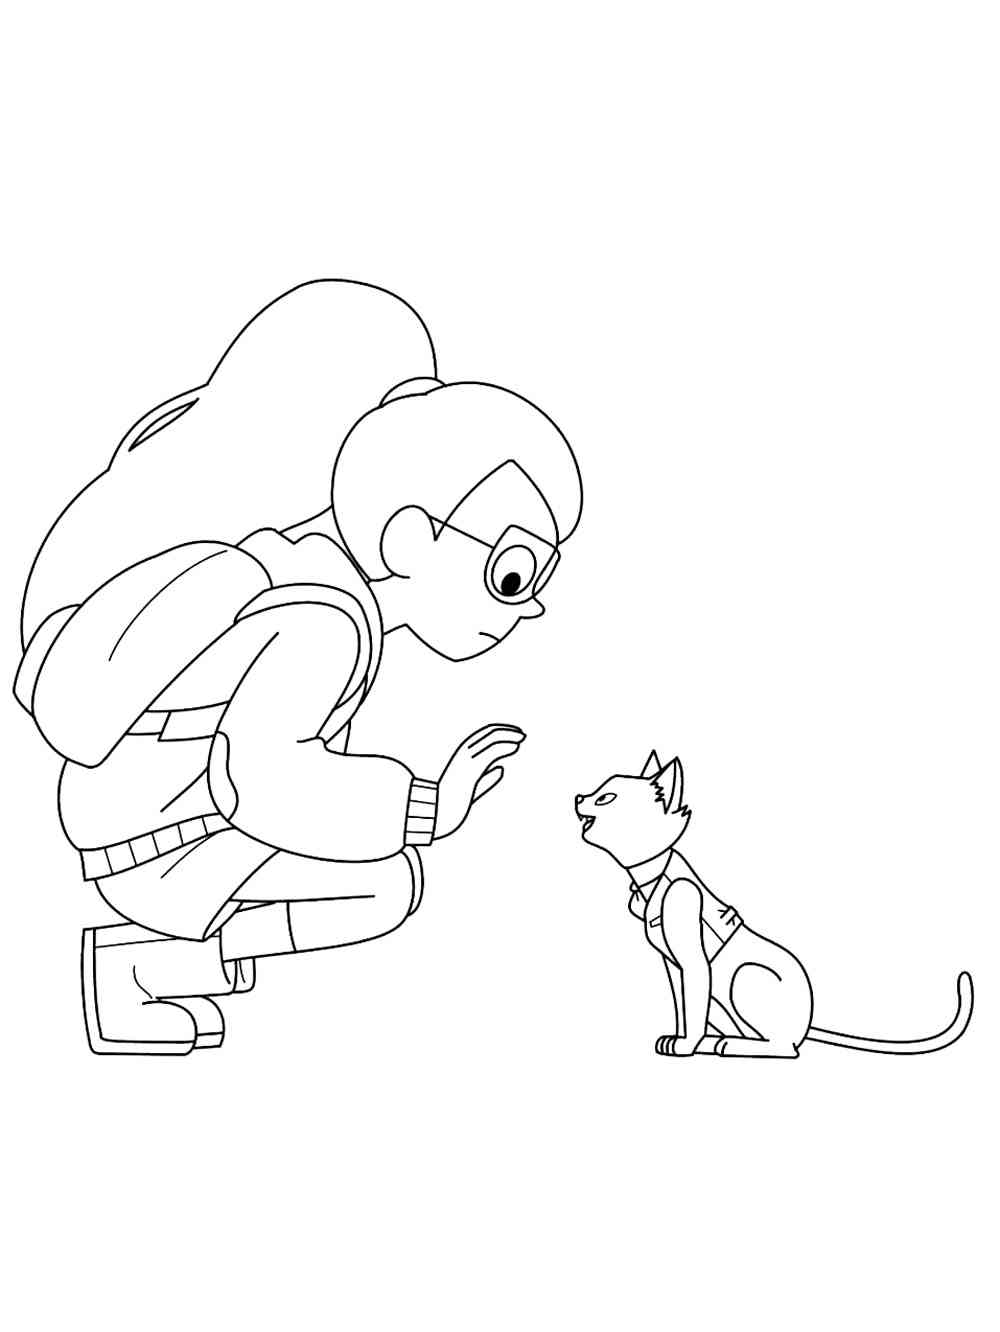 Infinity Train 9 coloring page